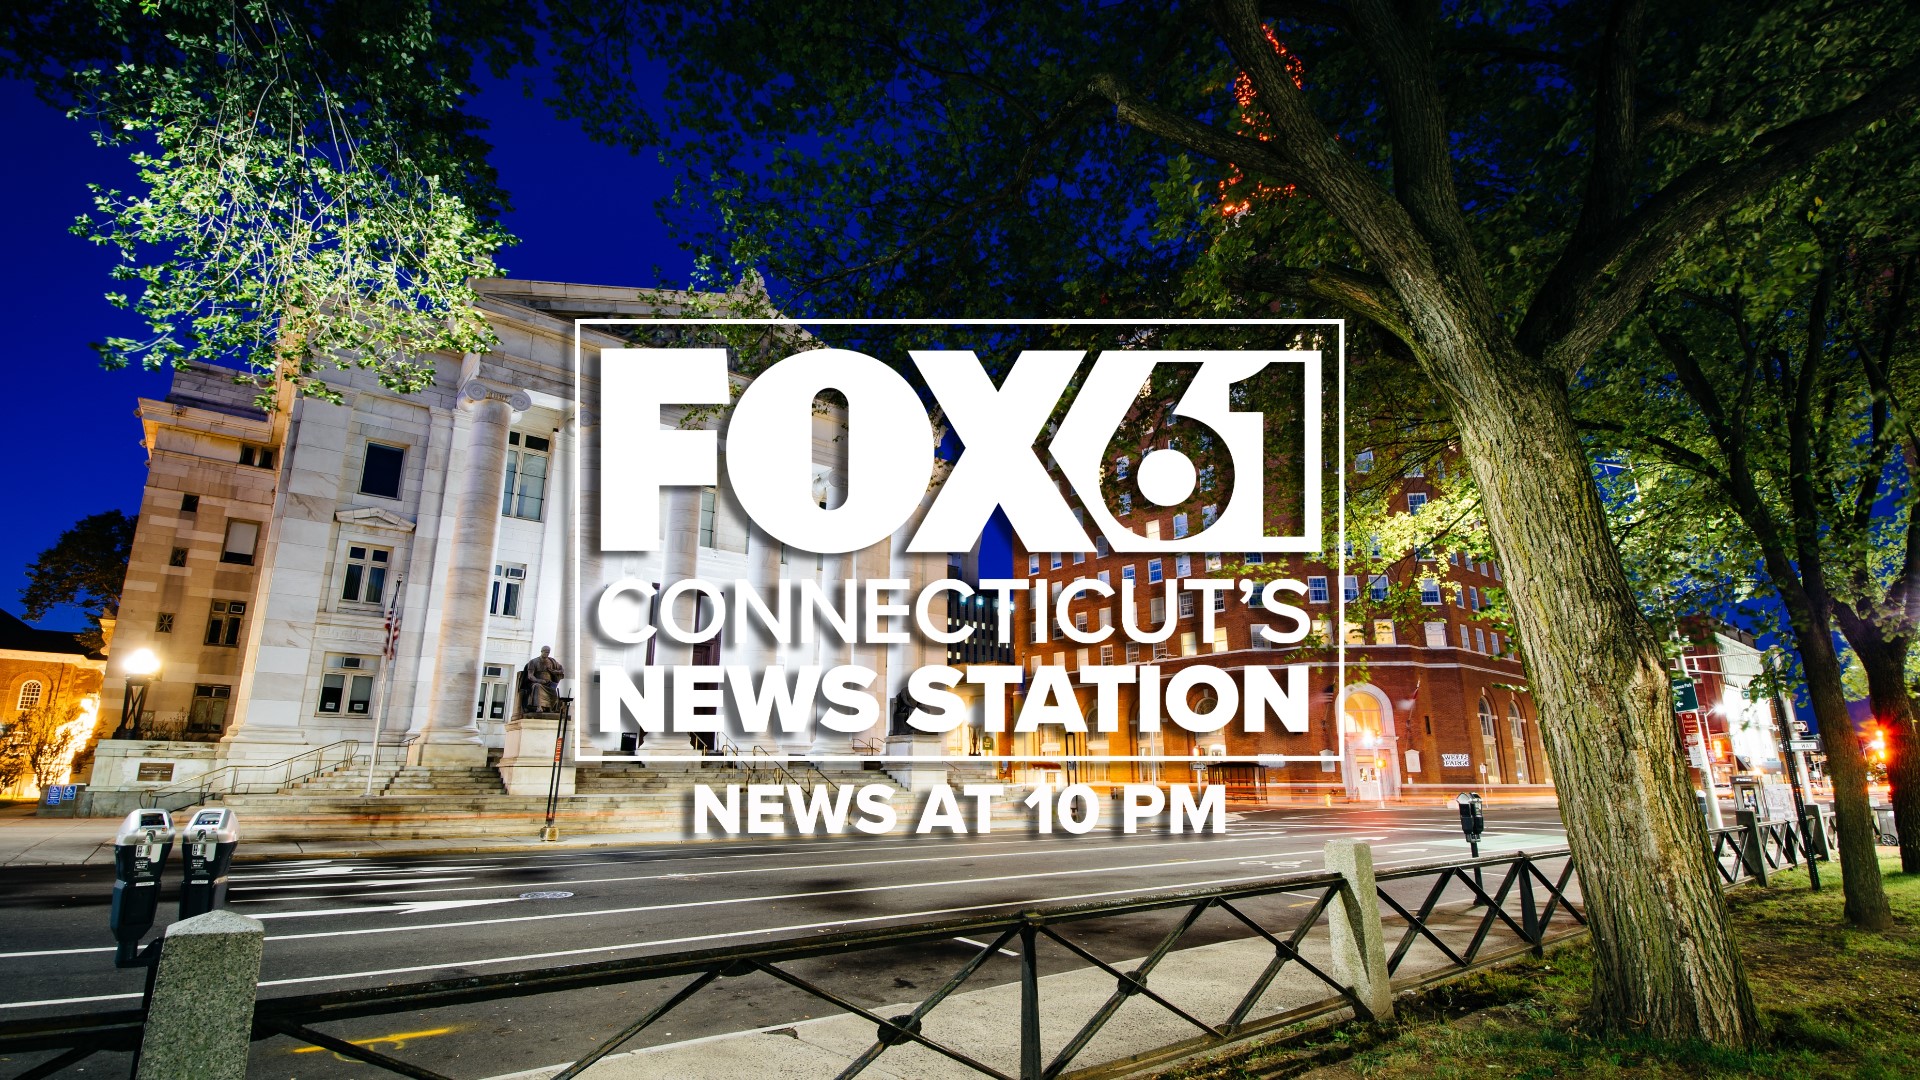 These are the top stories in Connecticut for June 2 at 10 p.m.